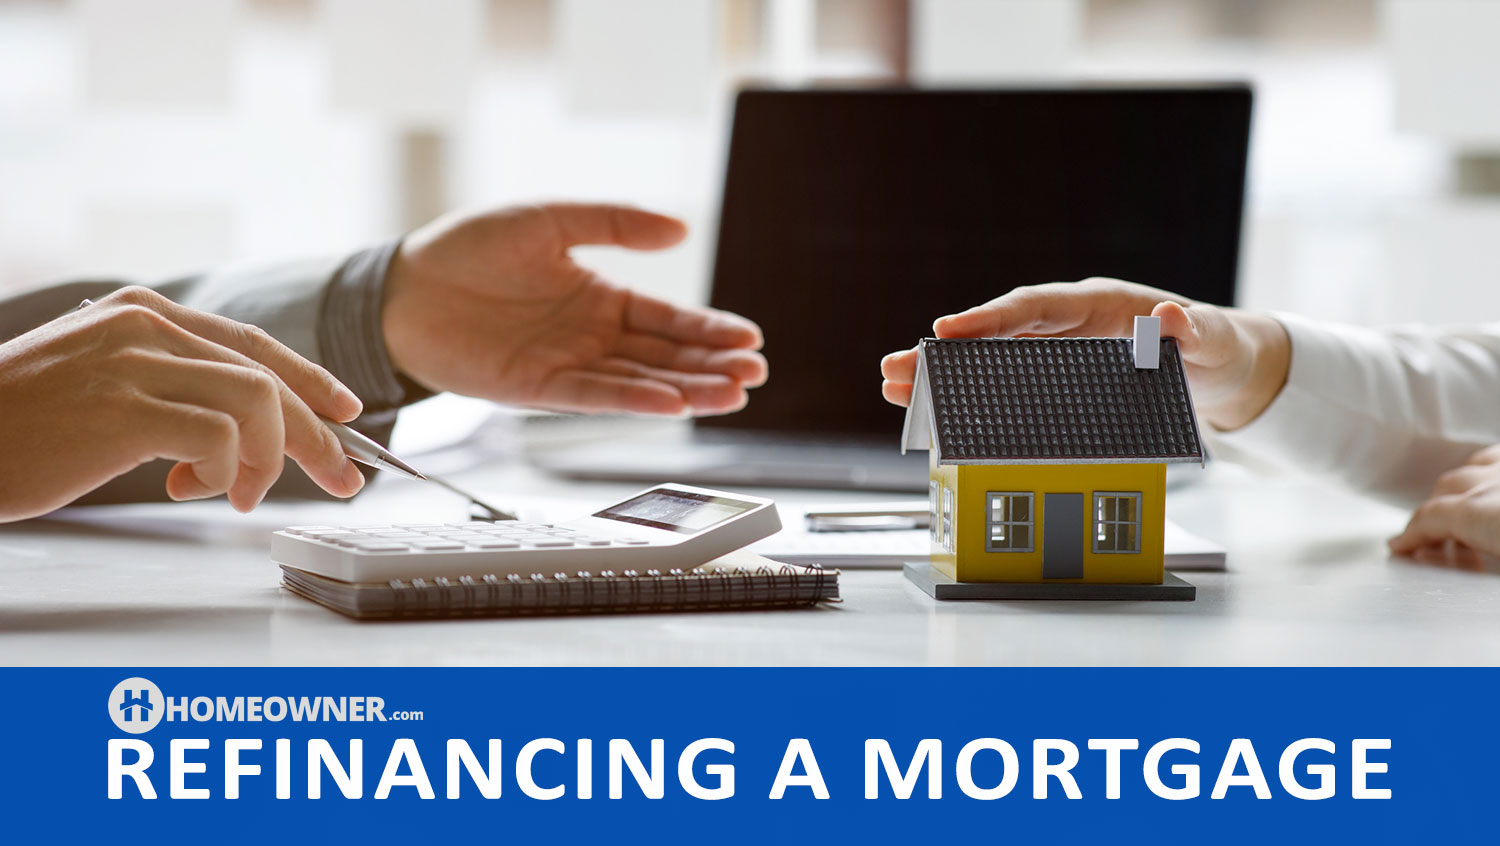 How Does Refinancing a Mortgage Work?